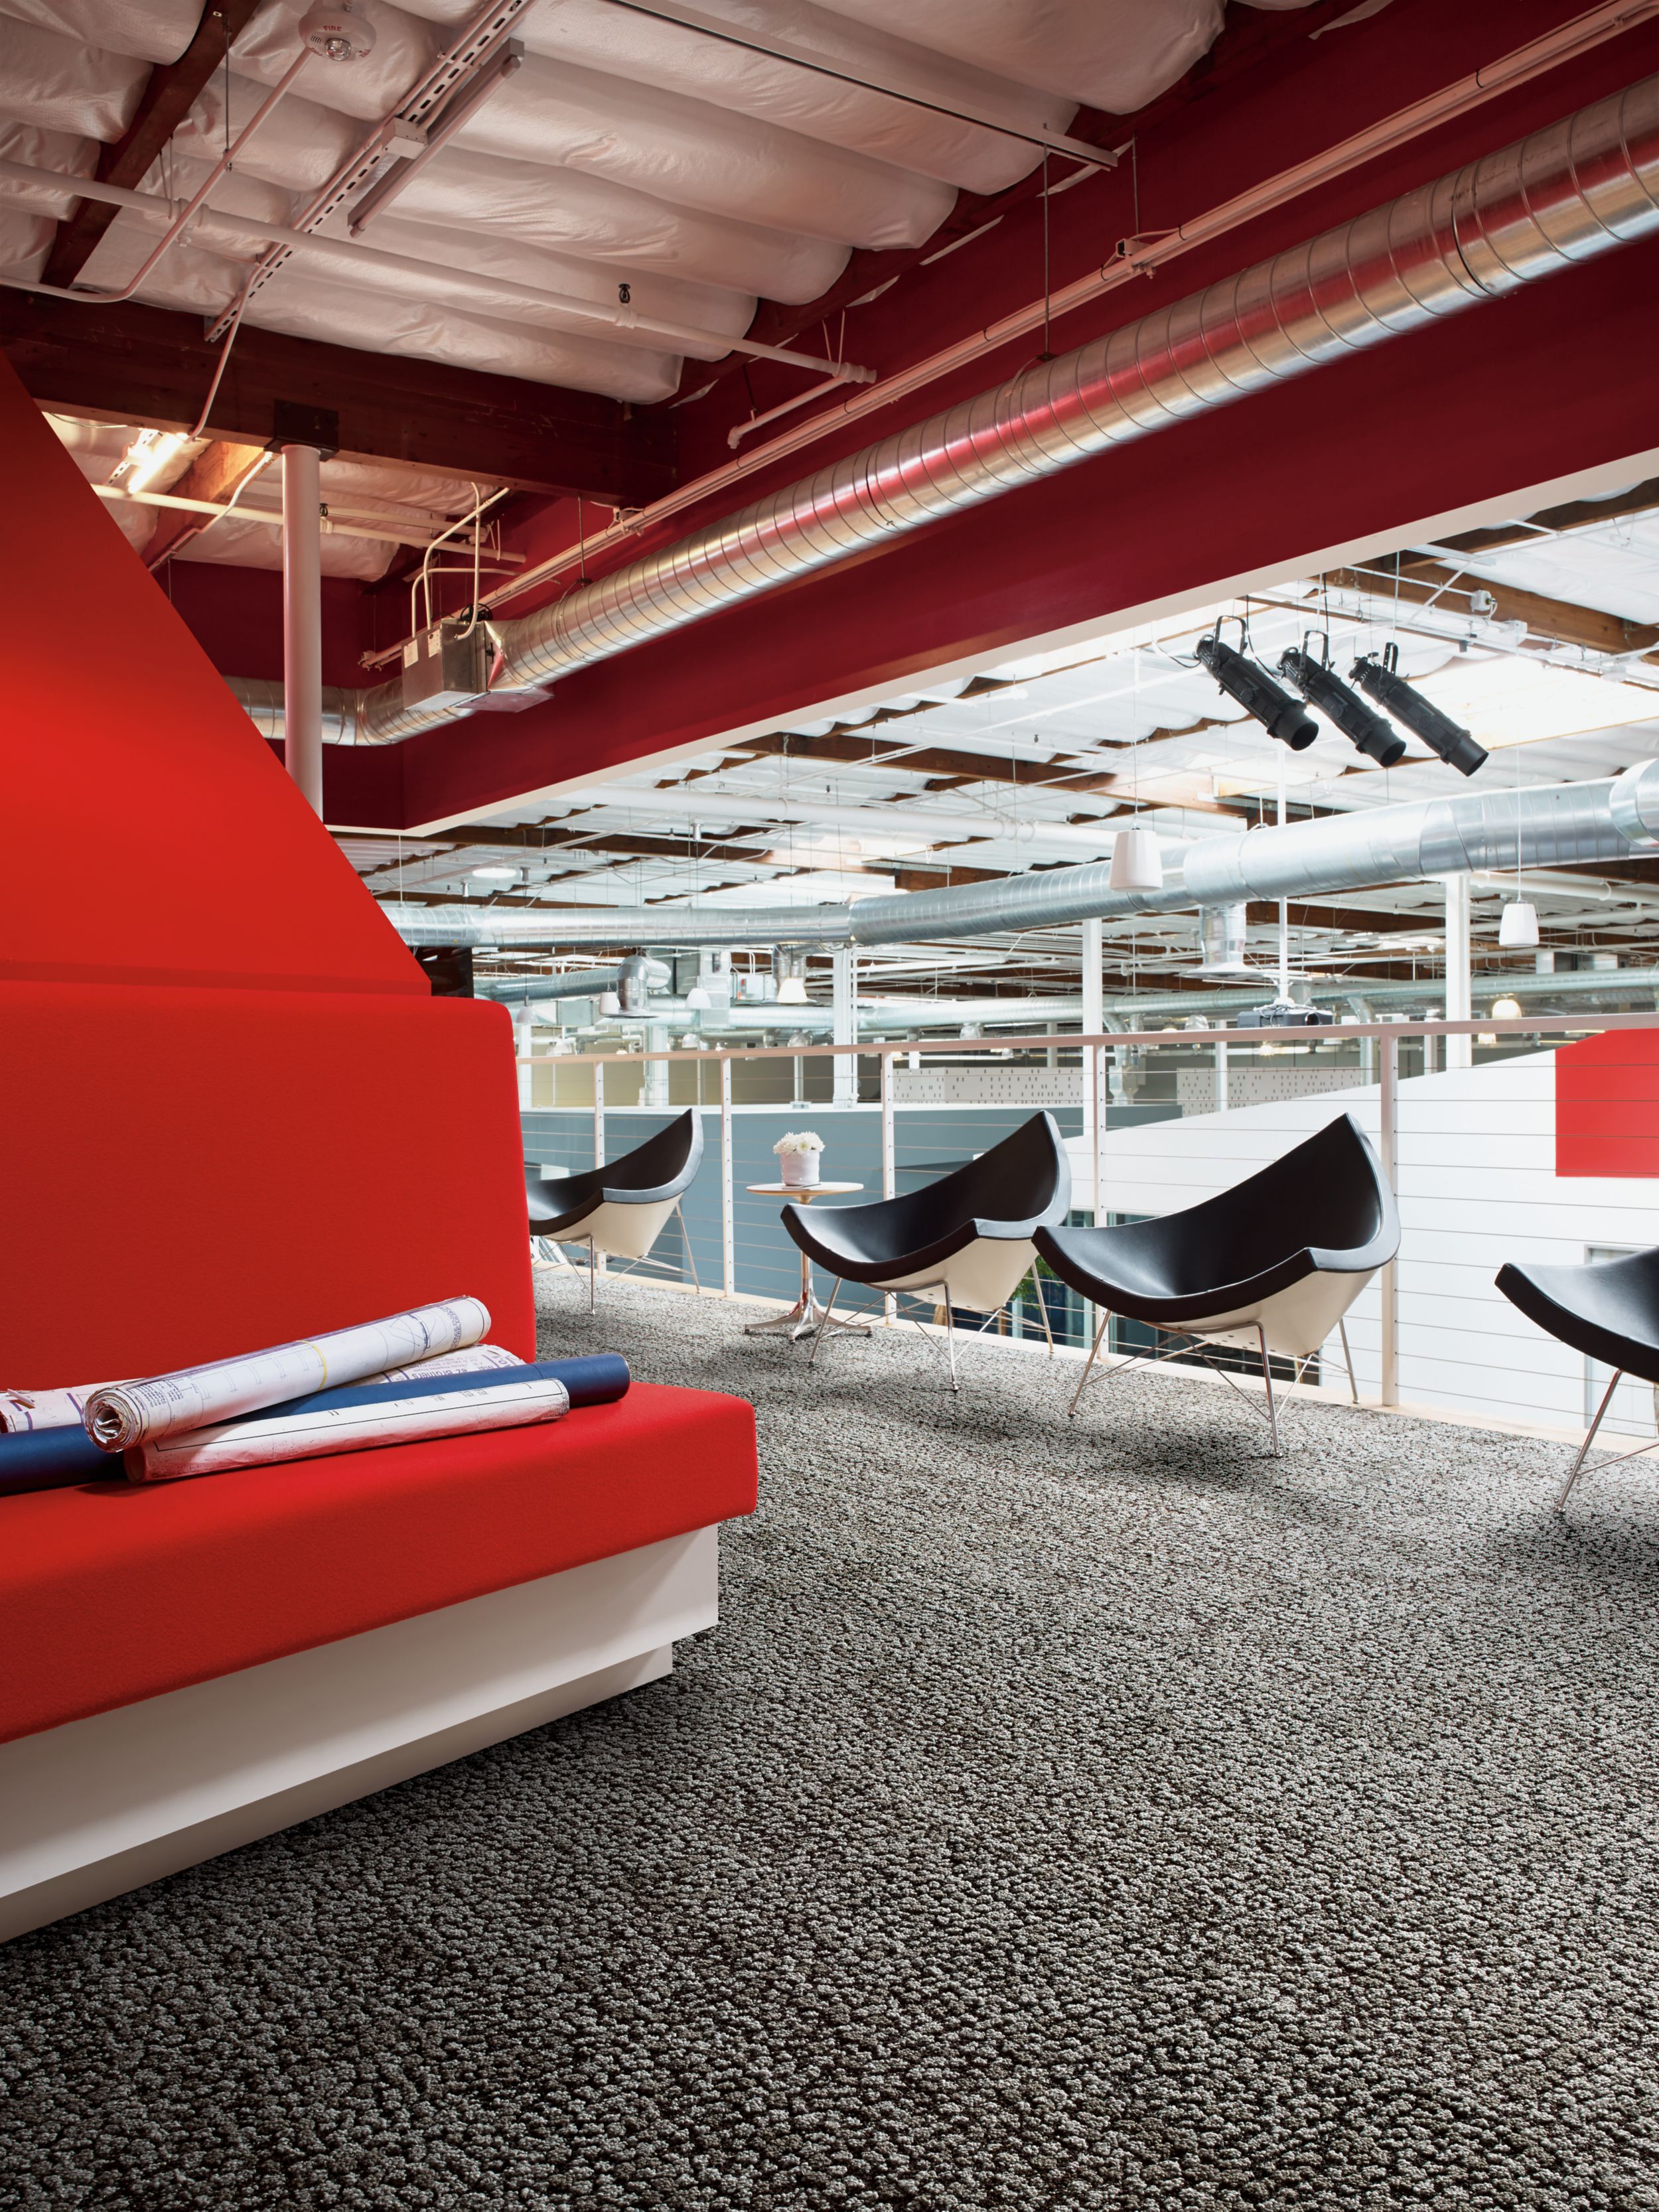 Interface HN840 plank carpet tile in upper level open space with red bench and black chairs número de imagen 5